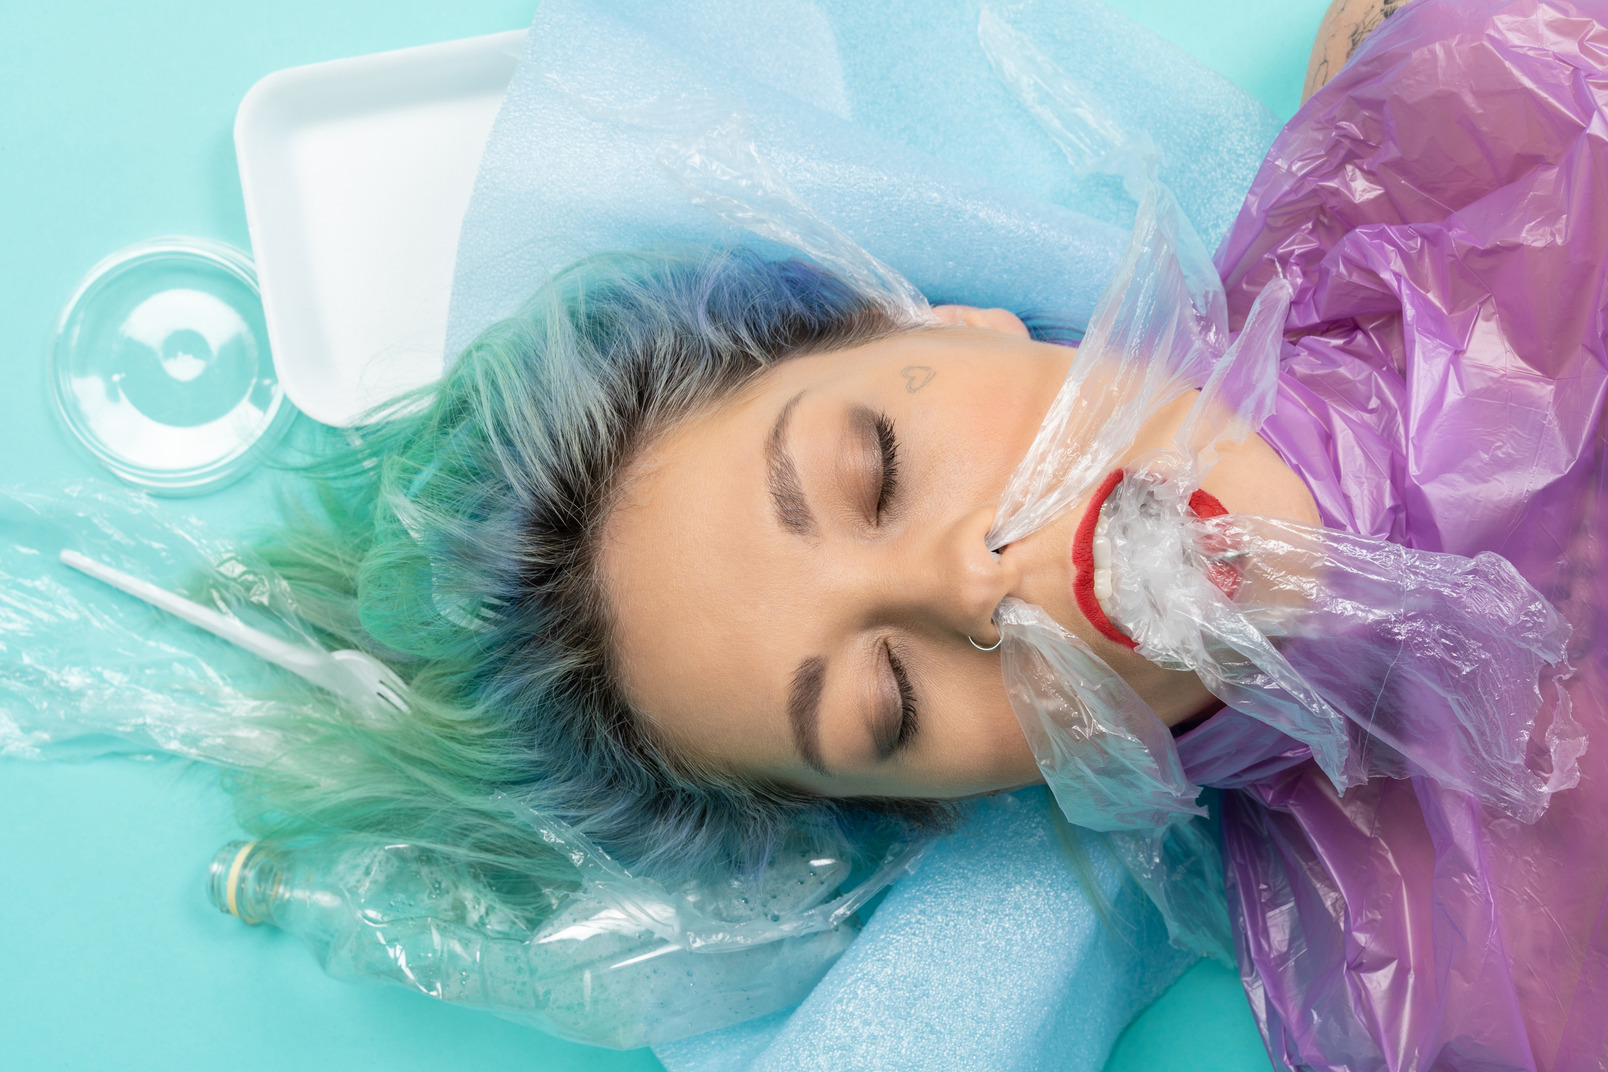 Young woman lying with her eyes closed surrounded with lots of plastic things